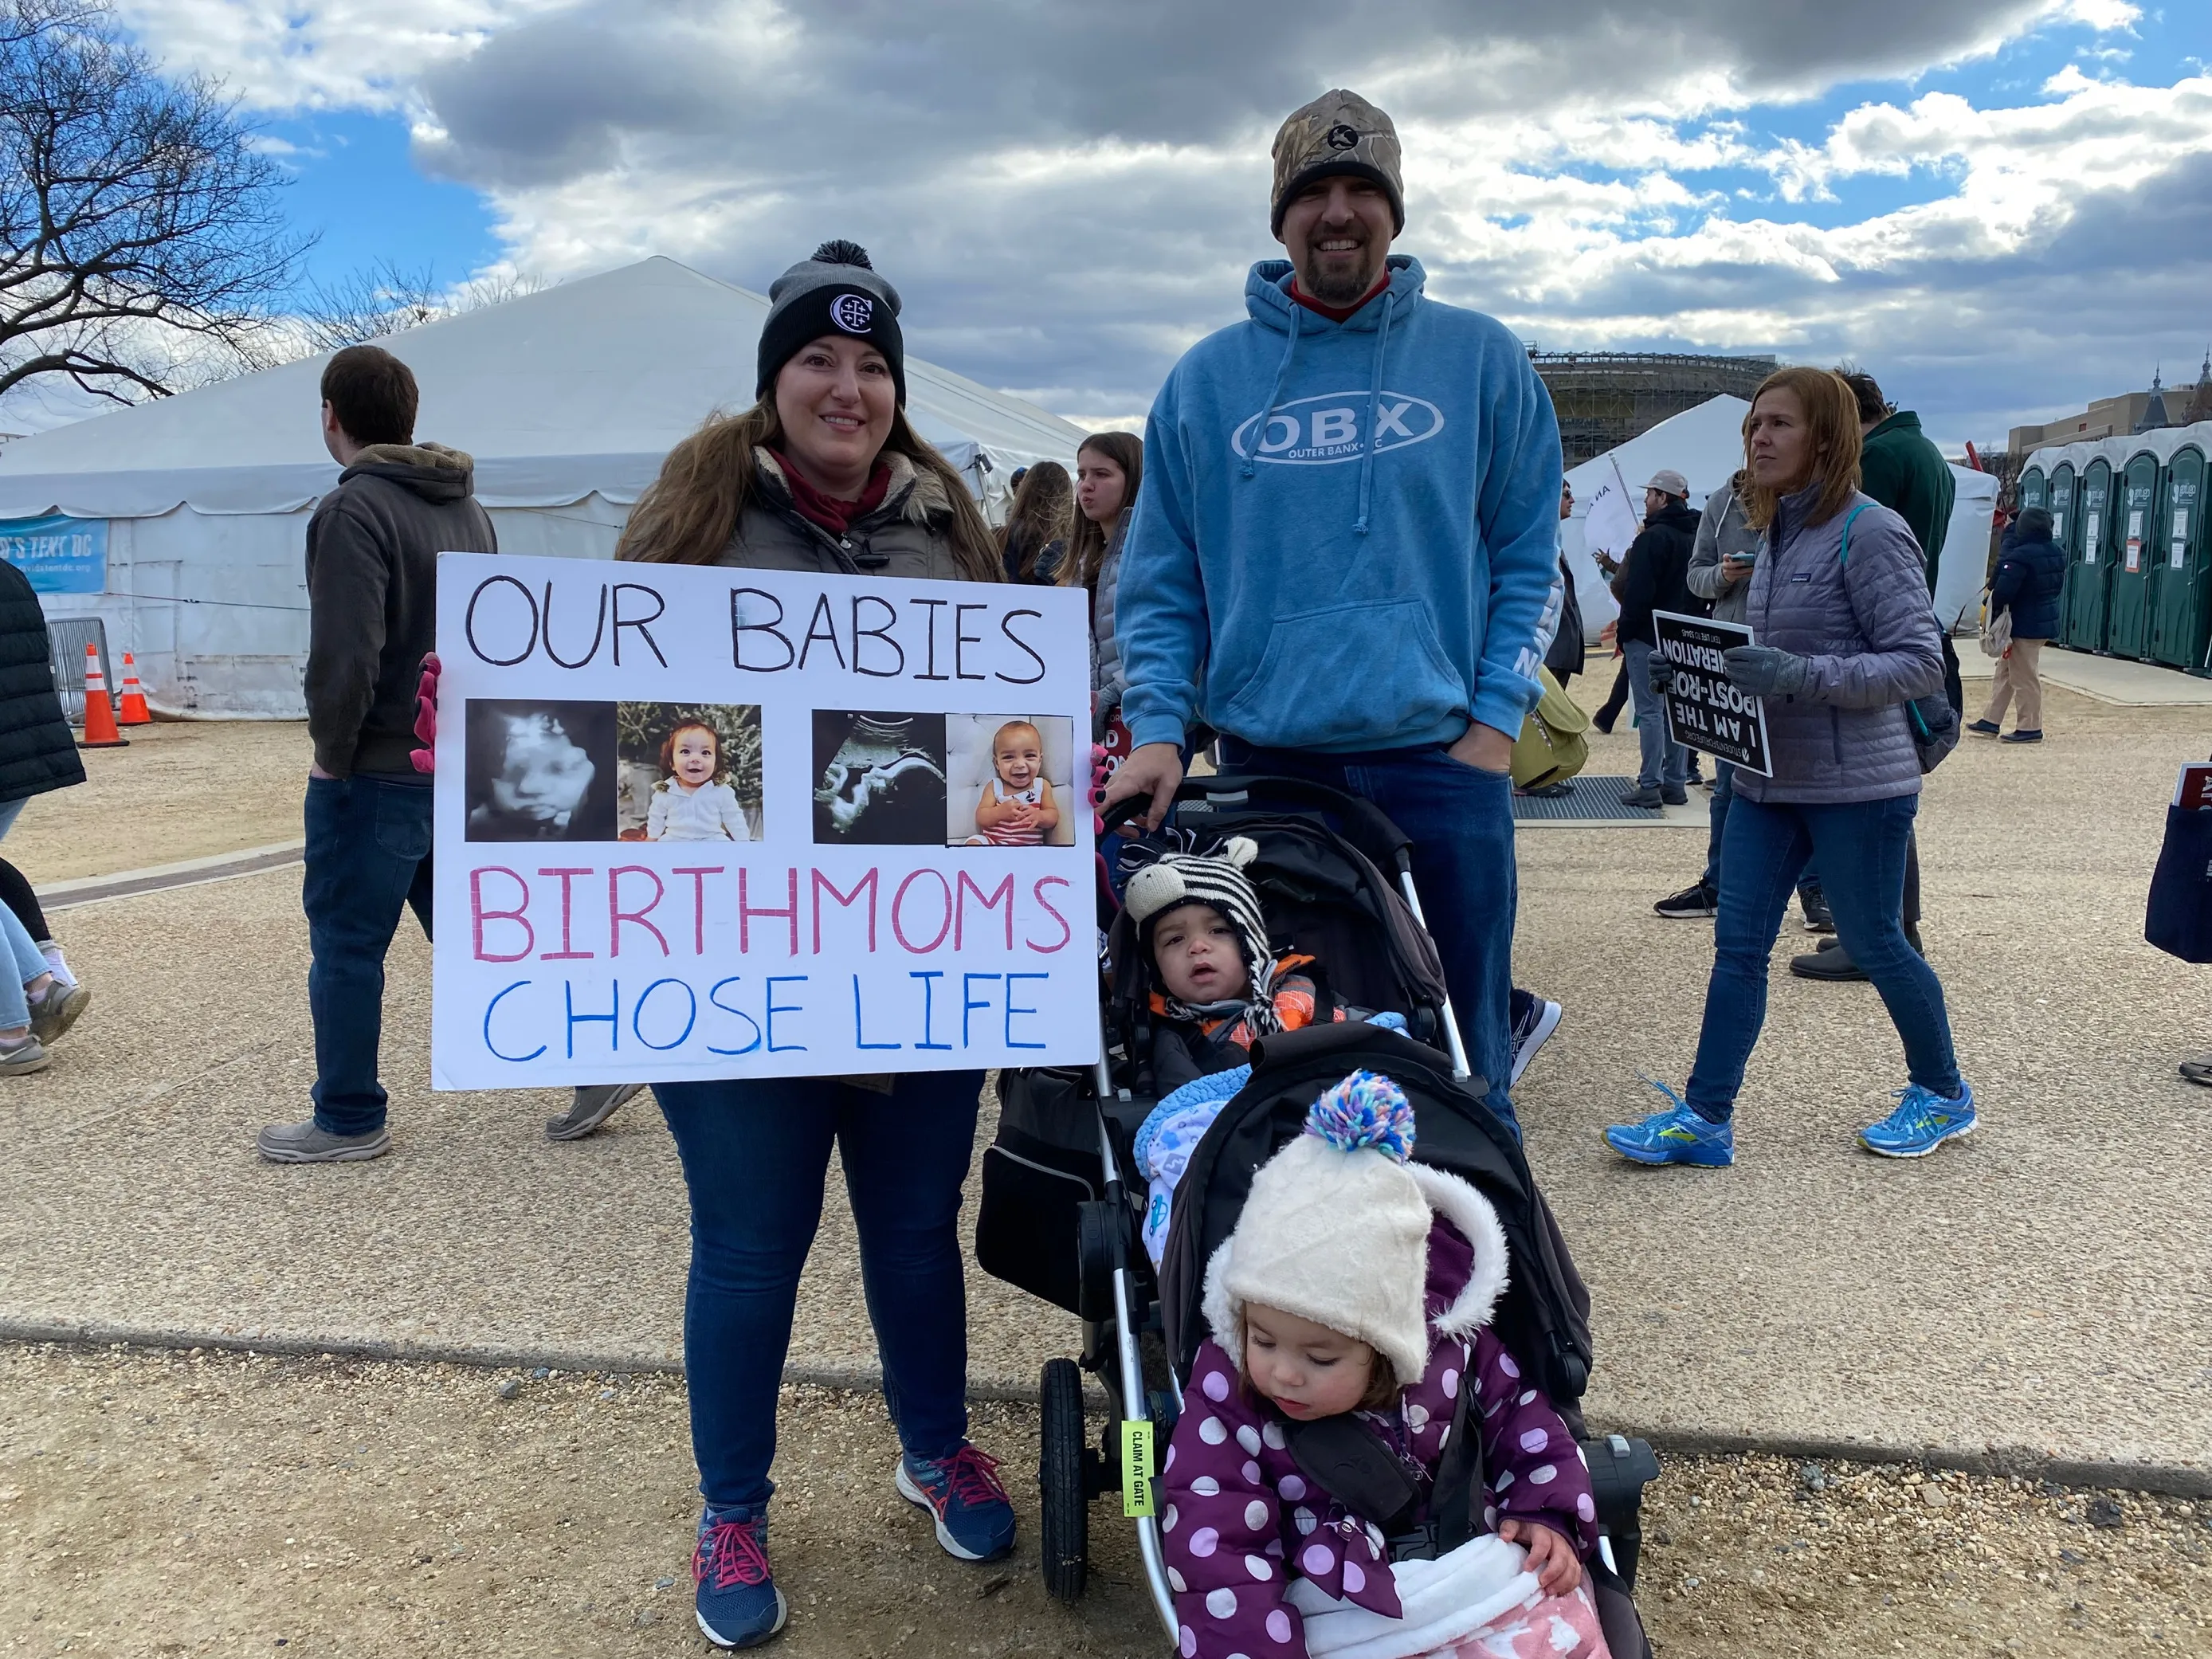 Daniel & Michelle Jacobeen from Alexandria, Virginia, hold a sign that says "Our babies birthmoms chose life.". Katie Yoder